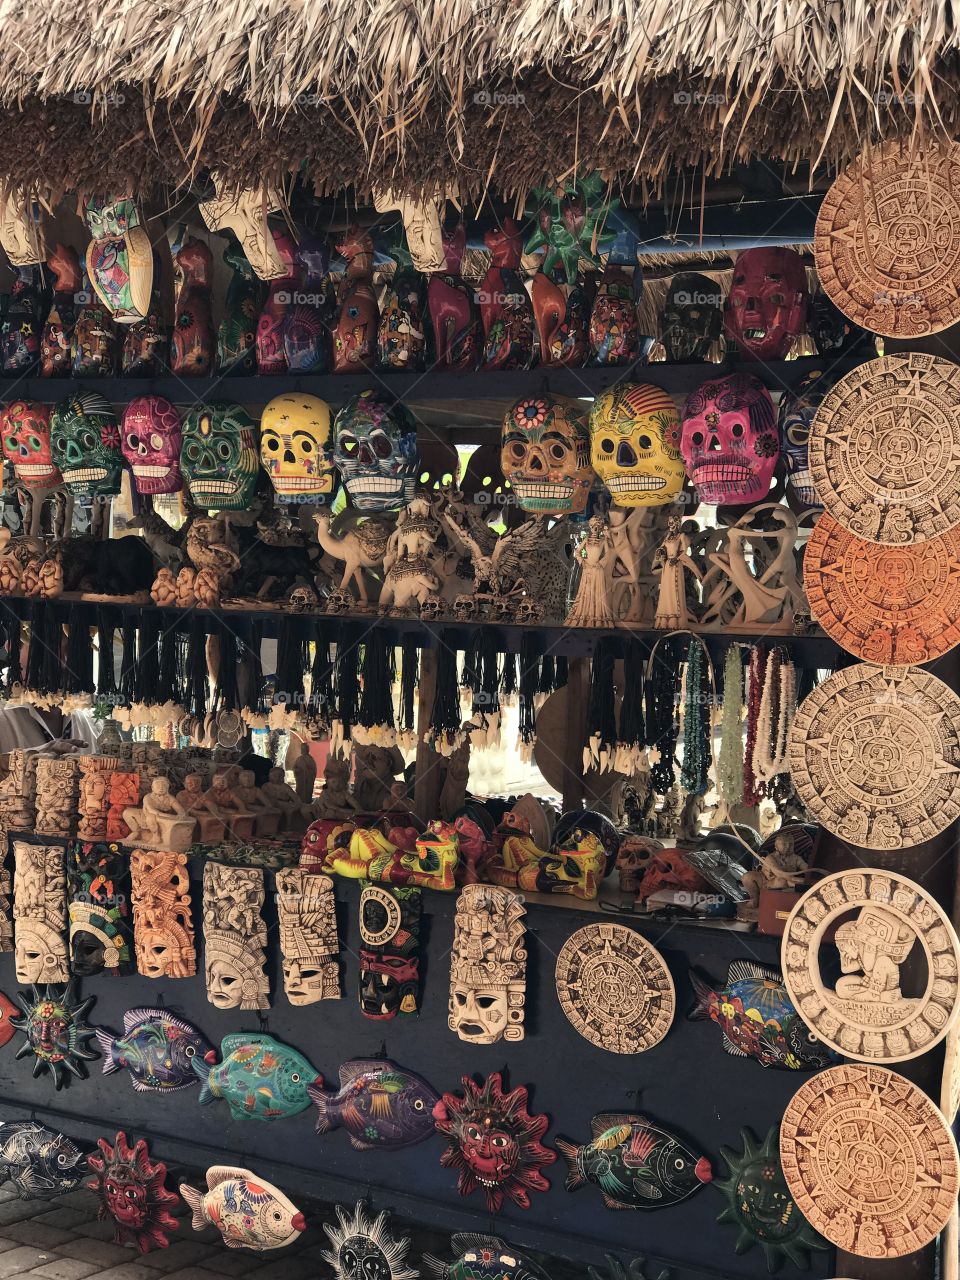 Handmade masks and souvenirs in Mexico